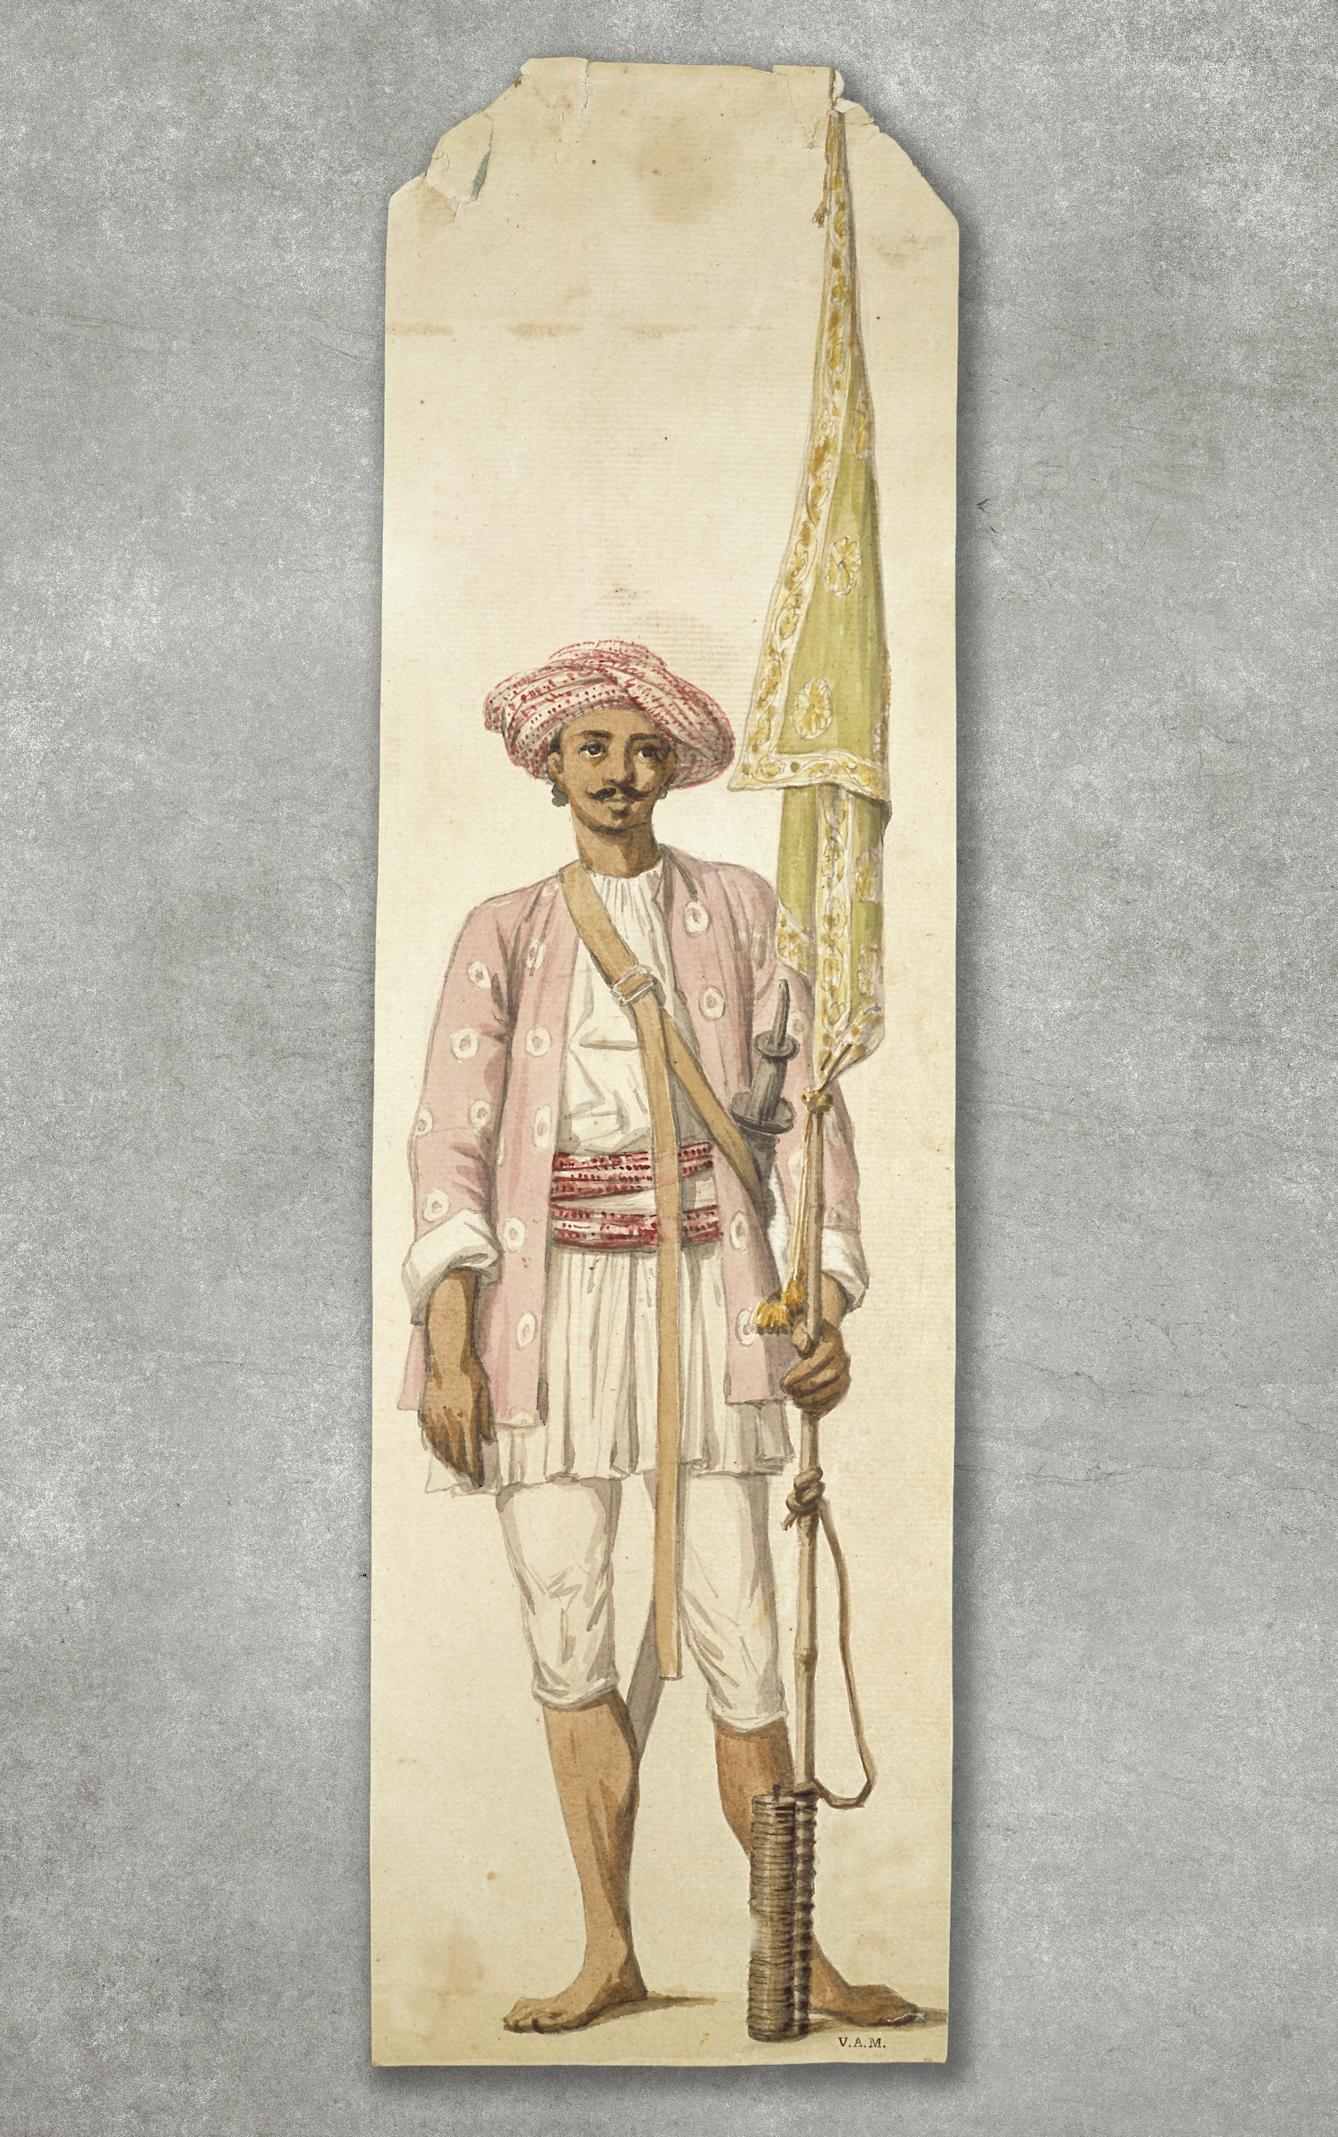 Colour painting of an Indian soldier of Tipu Sultan's army, using his rocket as a flagstaff. The rocket has a green patterned flag attached to the top of it. The soldier is wearing a 'Tyger Jacket', a long purple woollen shirt with white diamond formed spots on it. On his head the soldier wears a red and white muslin turban, matching the red sash around his waist. Beneath his white trousers, his legs and feet are bare.